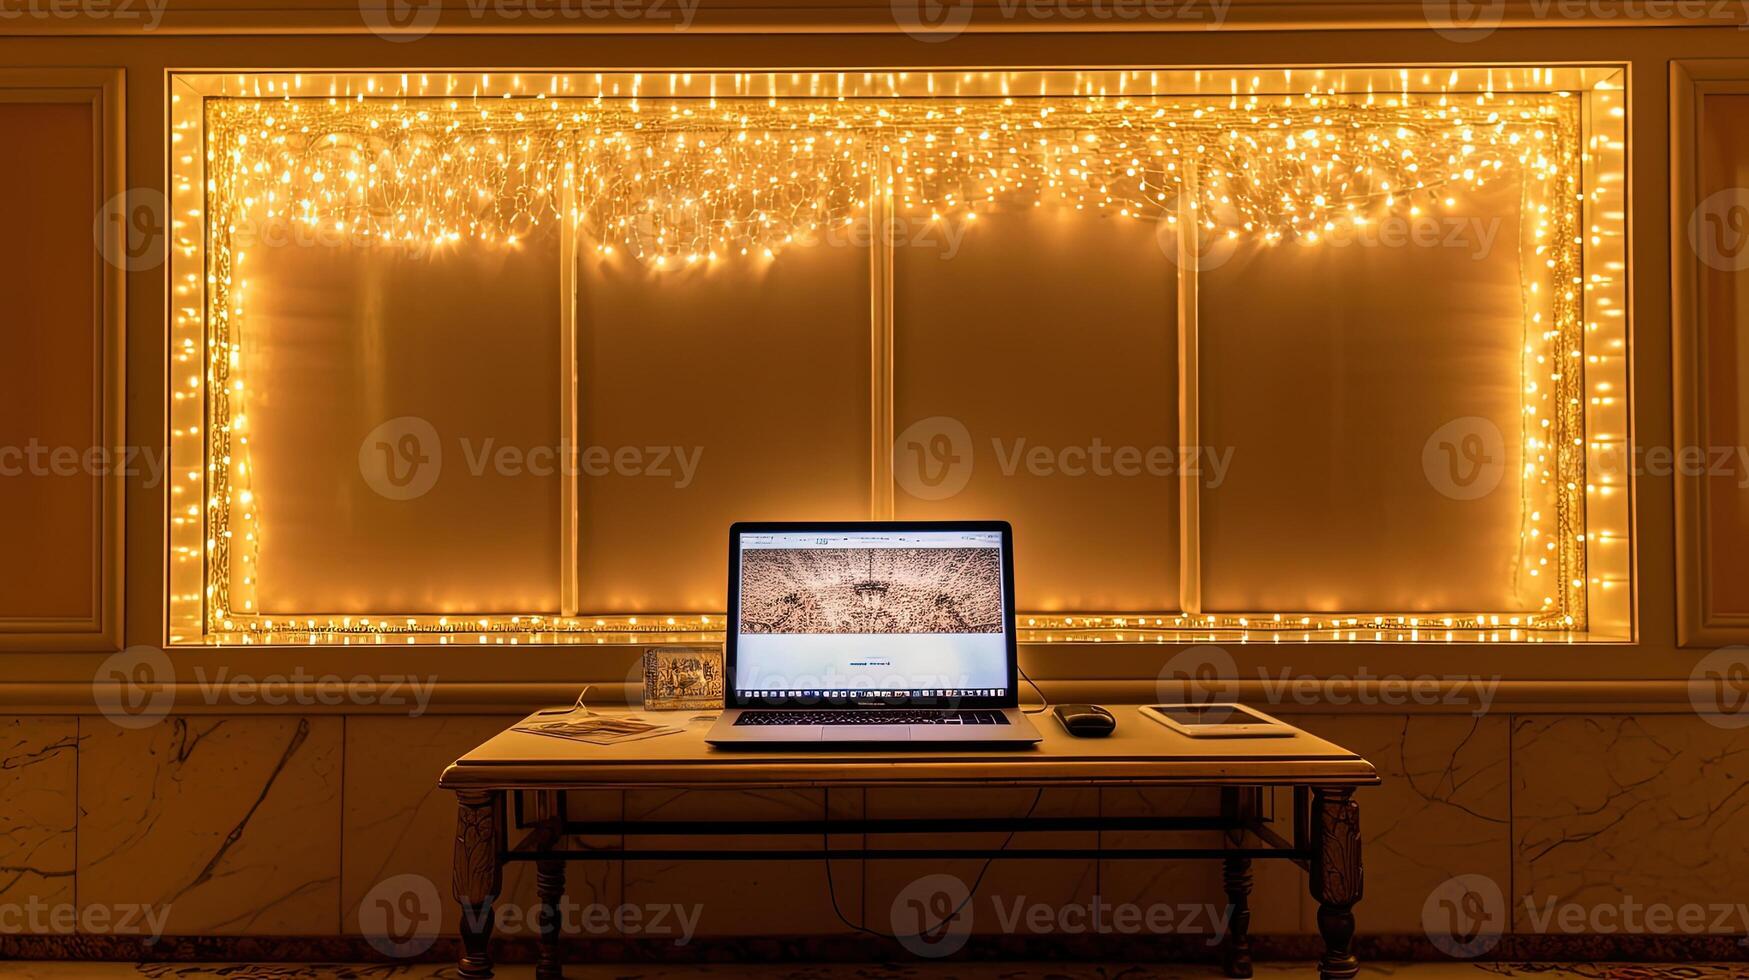 A Laptop on Table at Golden Lighting Decorated Room for Diwali or Festival Celebration Prefect Design Technology. photo